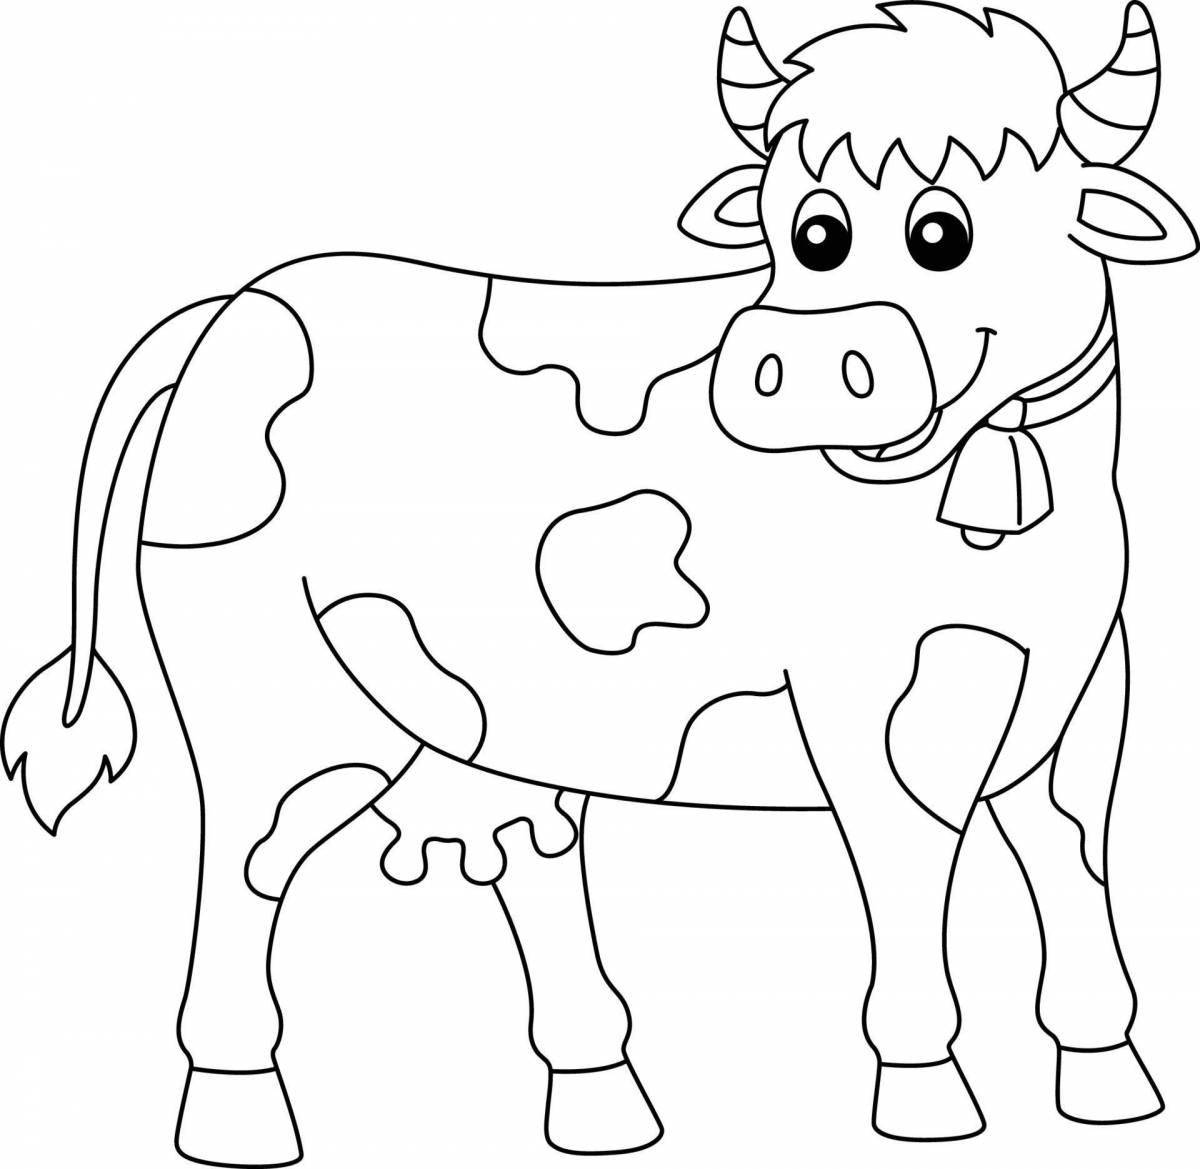 Coloring book wonderful cow for children 4-5 years old